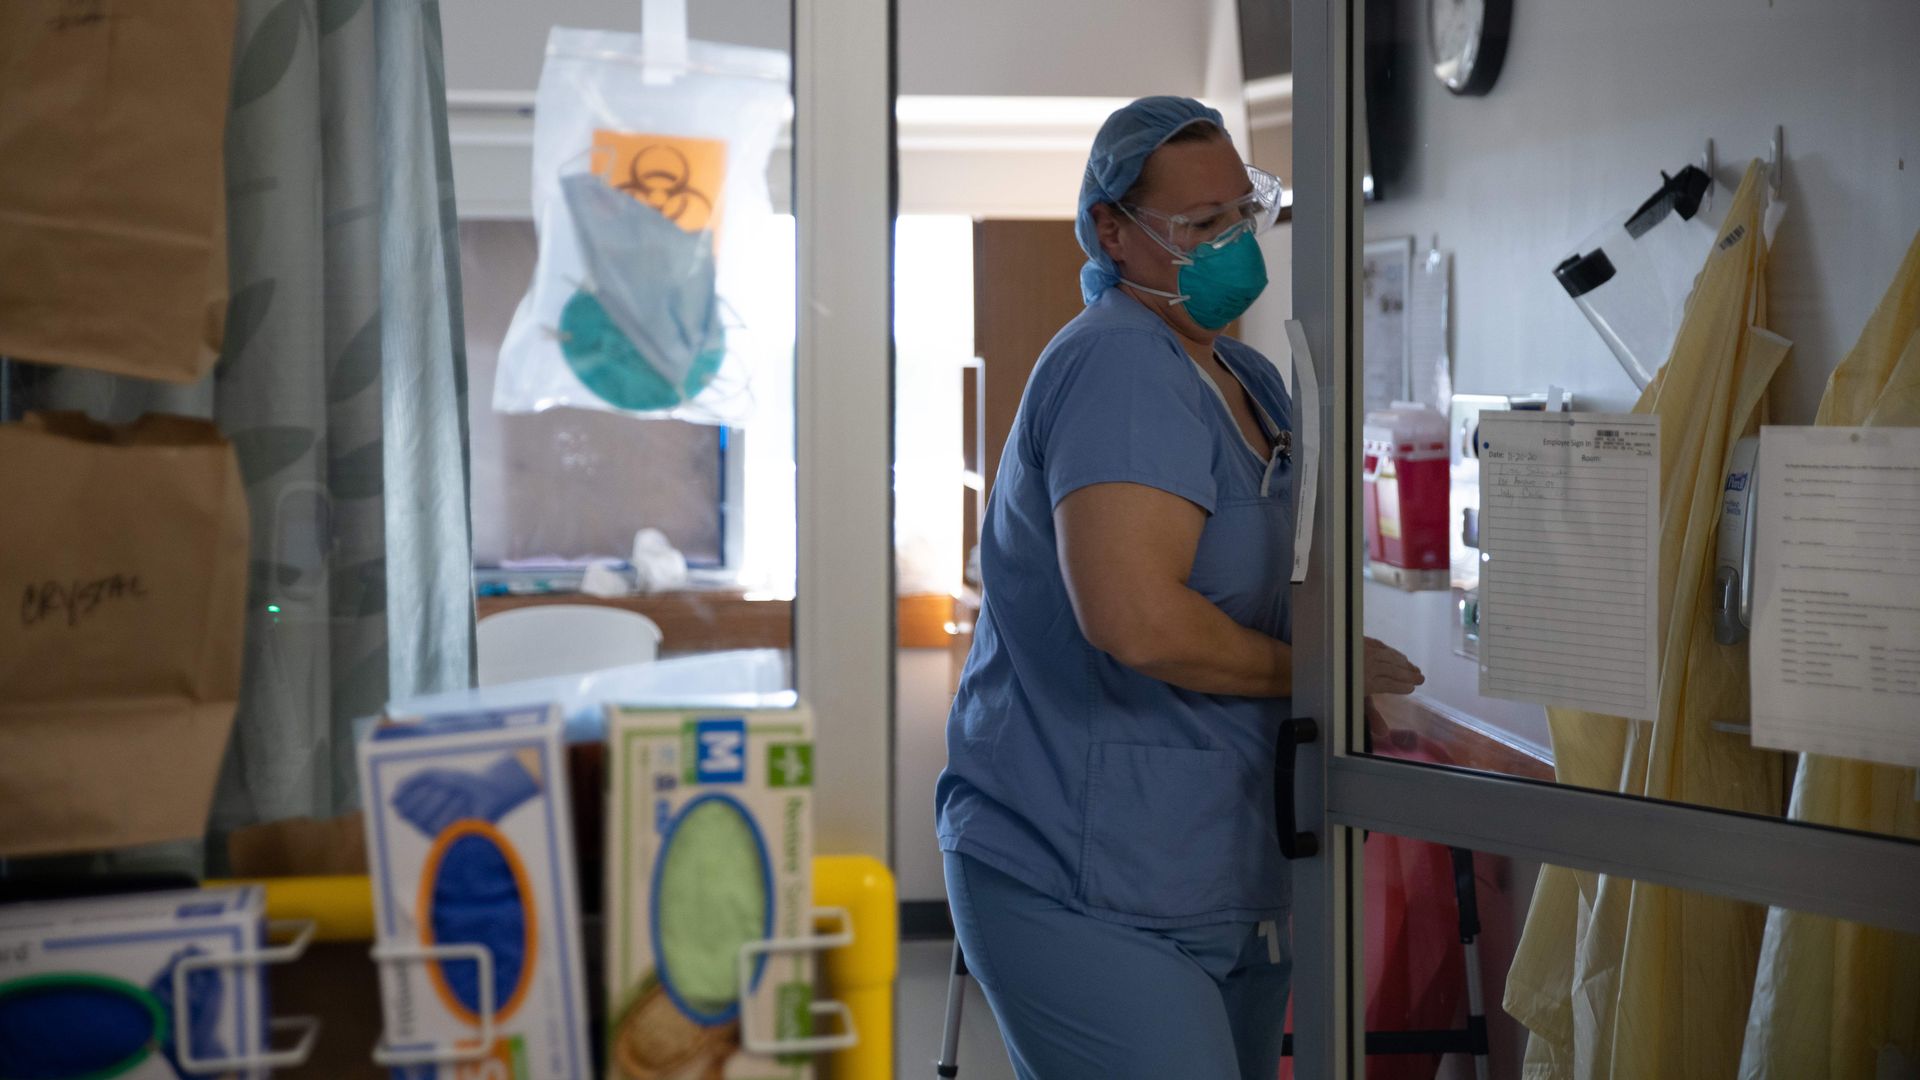 A medical professional wearing PPE opens a door 